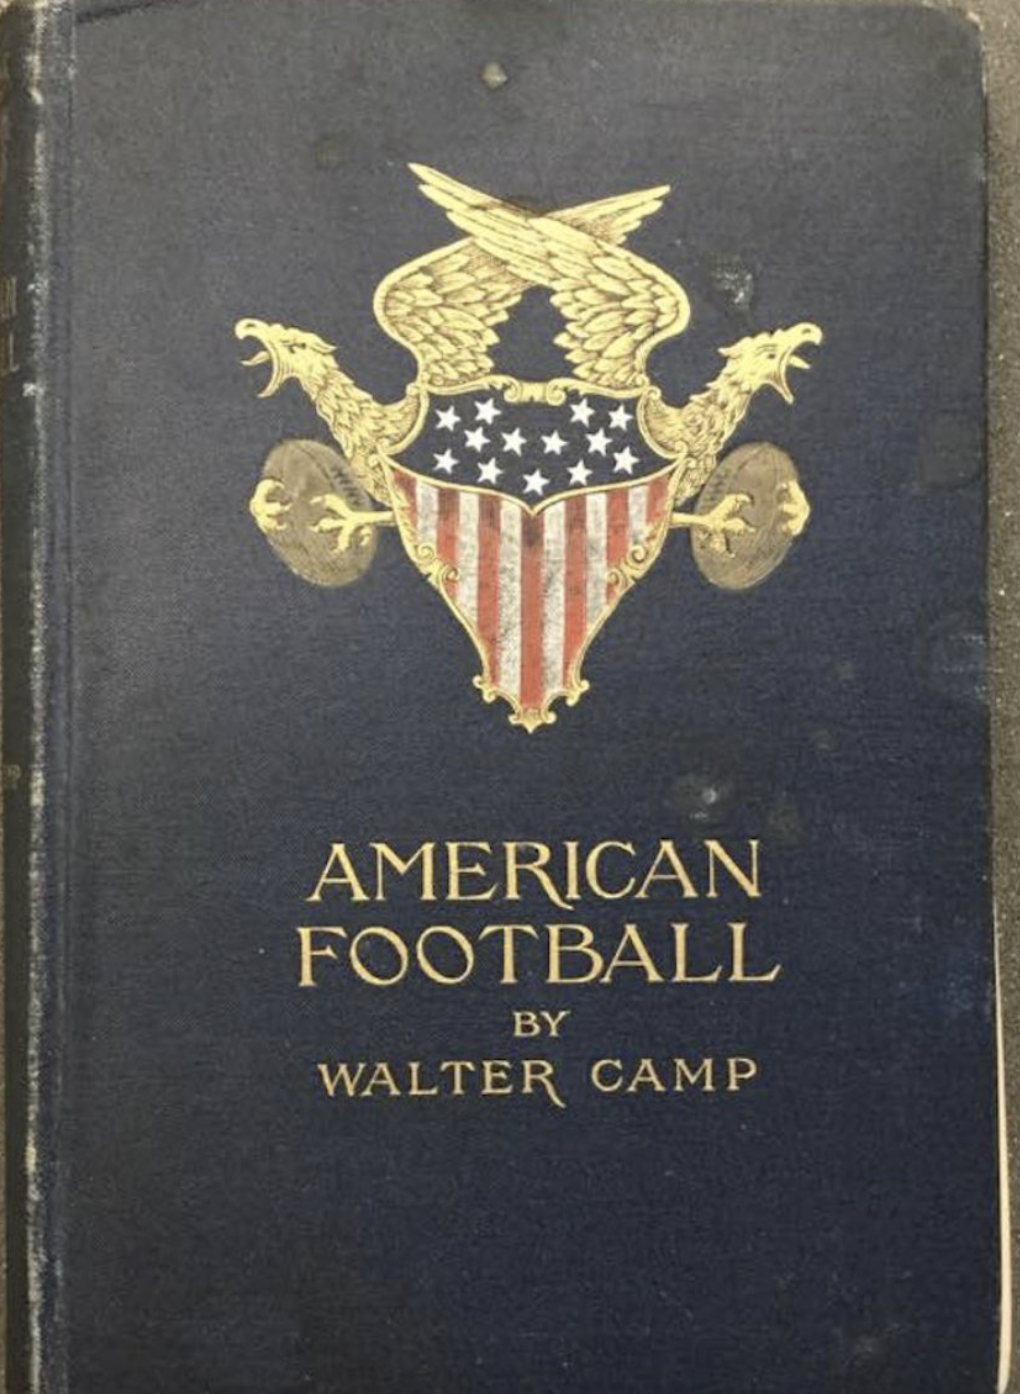 Photo of cover of book "American Football"